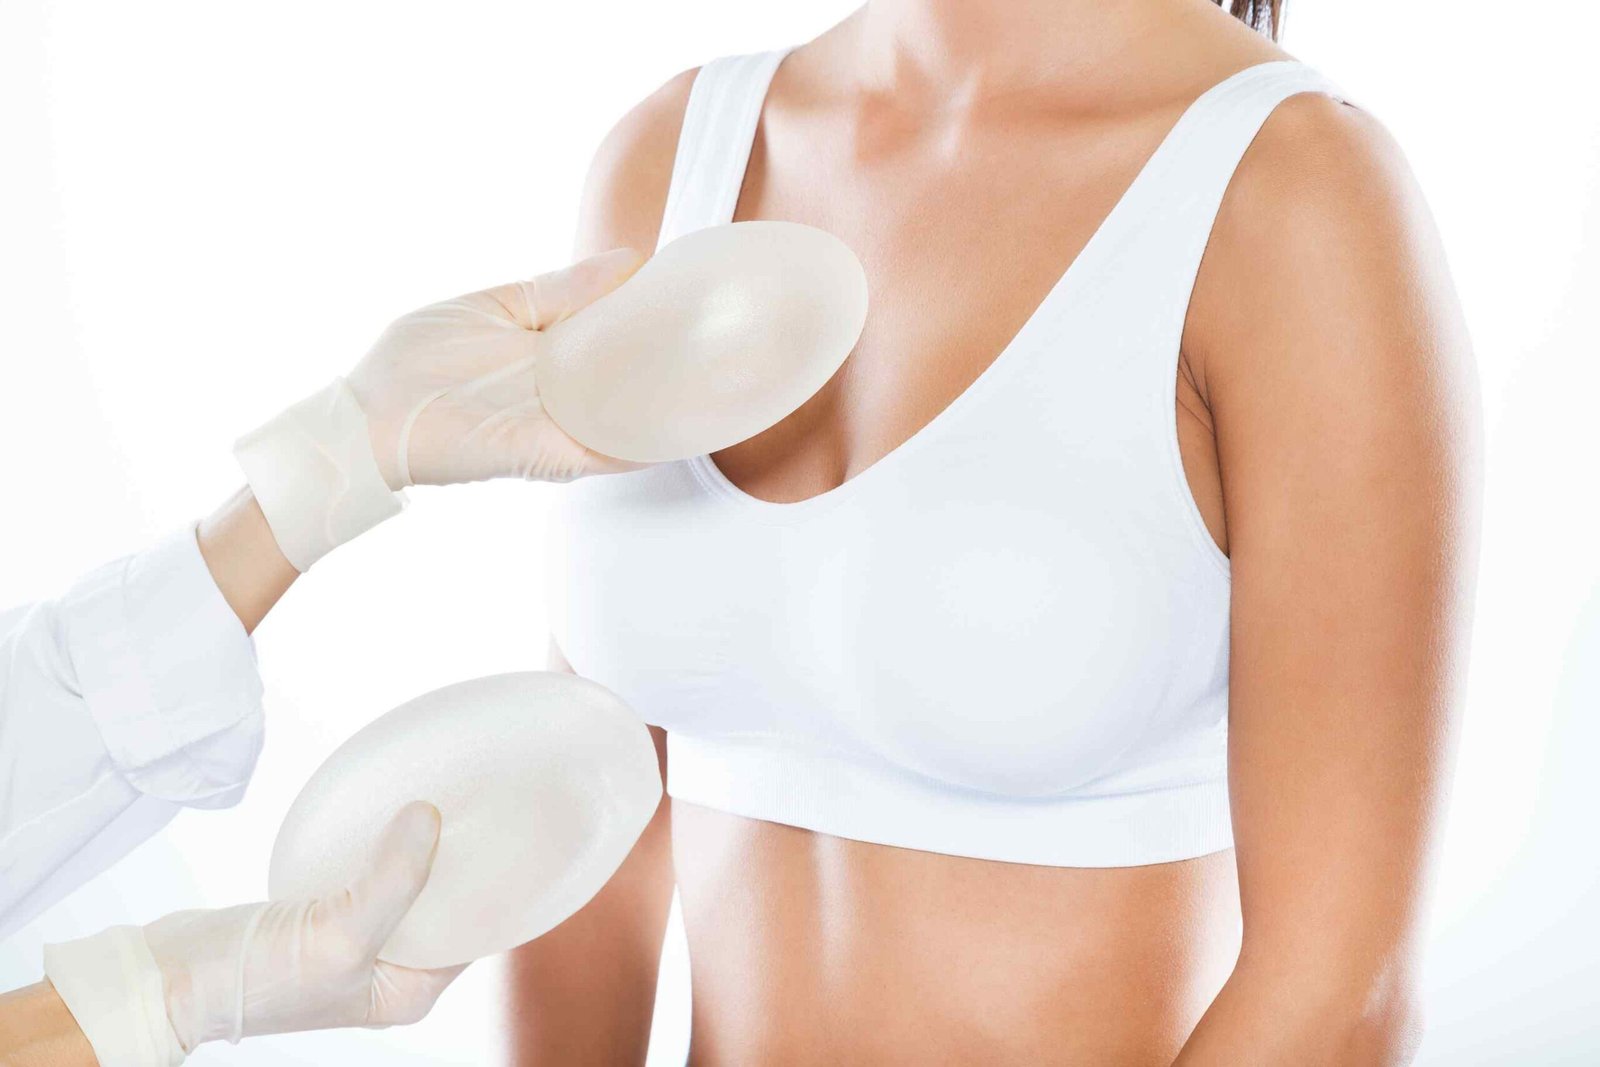 Surgery for breast reduction